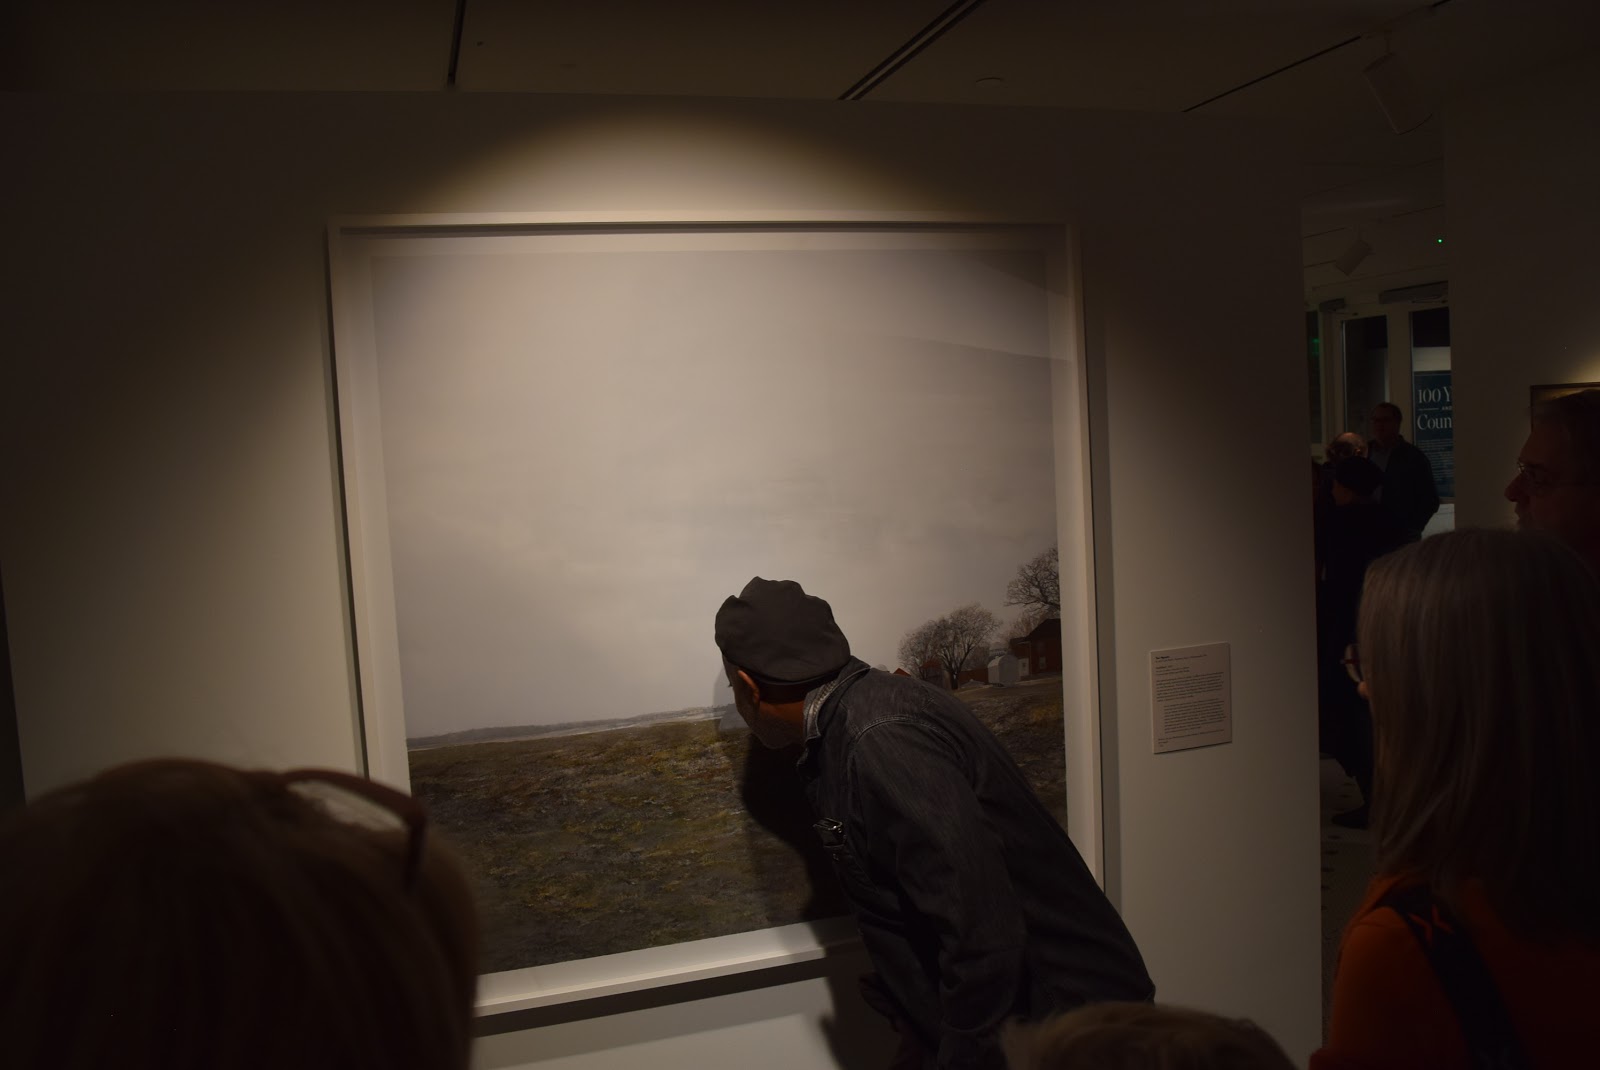 A Minnesota Museum of American Art visitor gets up close to inspect the details in Teo Nguyen's  painting "Untitled I.”